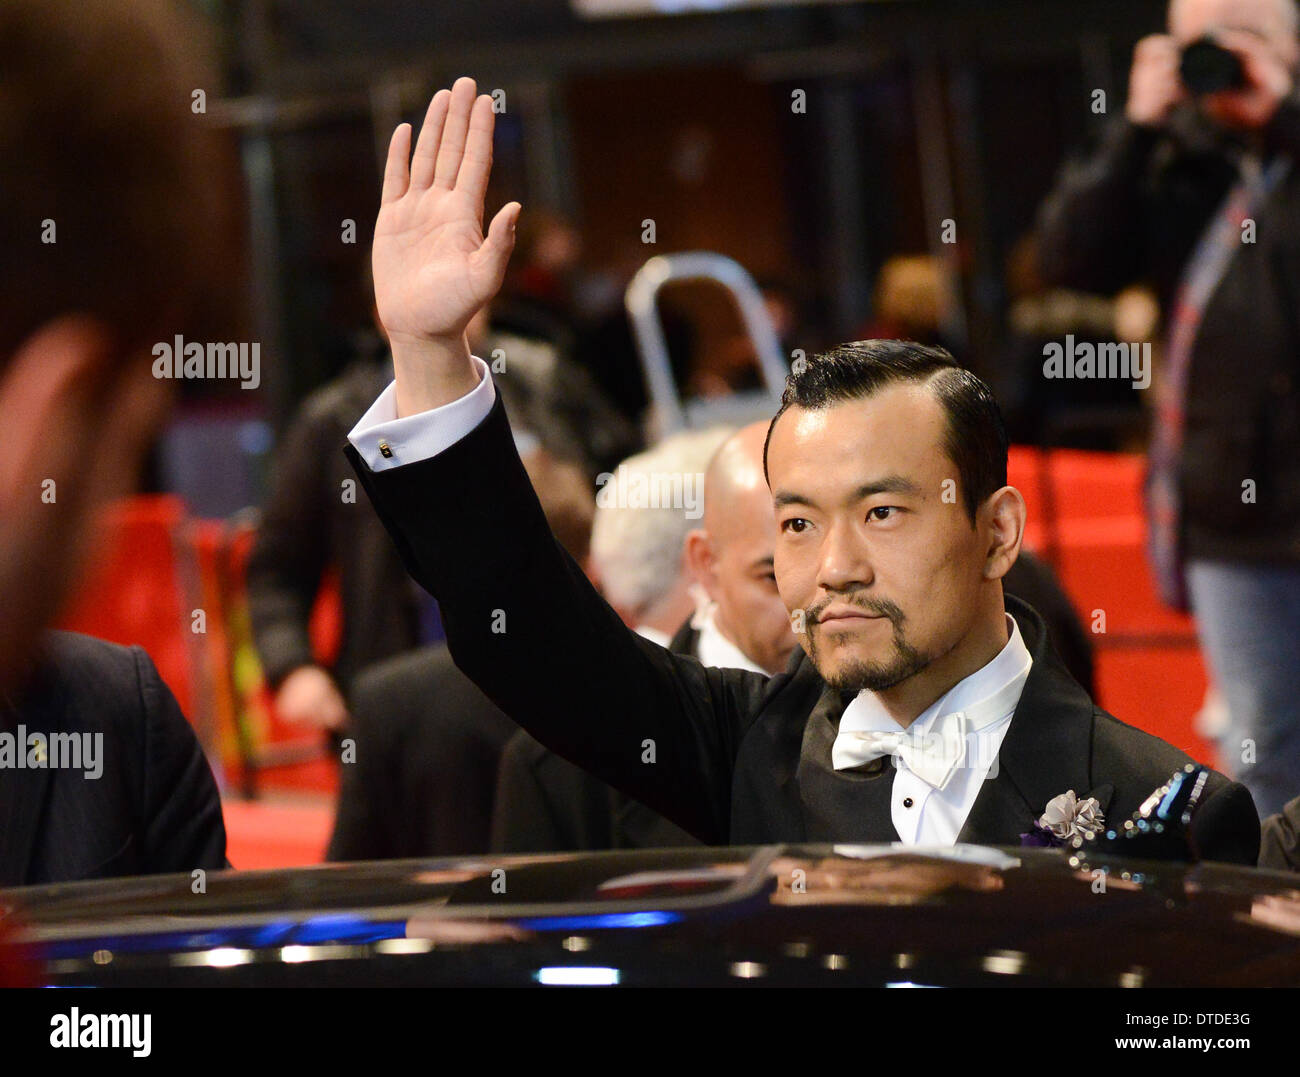 BERLIN, GERMANY, 15th Feb, 2014. Liao Fan attends the Closing Ceremony at the 64th Annual Berlinale International Film Festival at Berlinale Palast on February 15th, 2014 in Berlin, Germany. Stock Photo